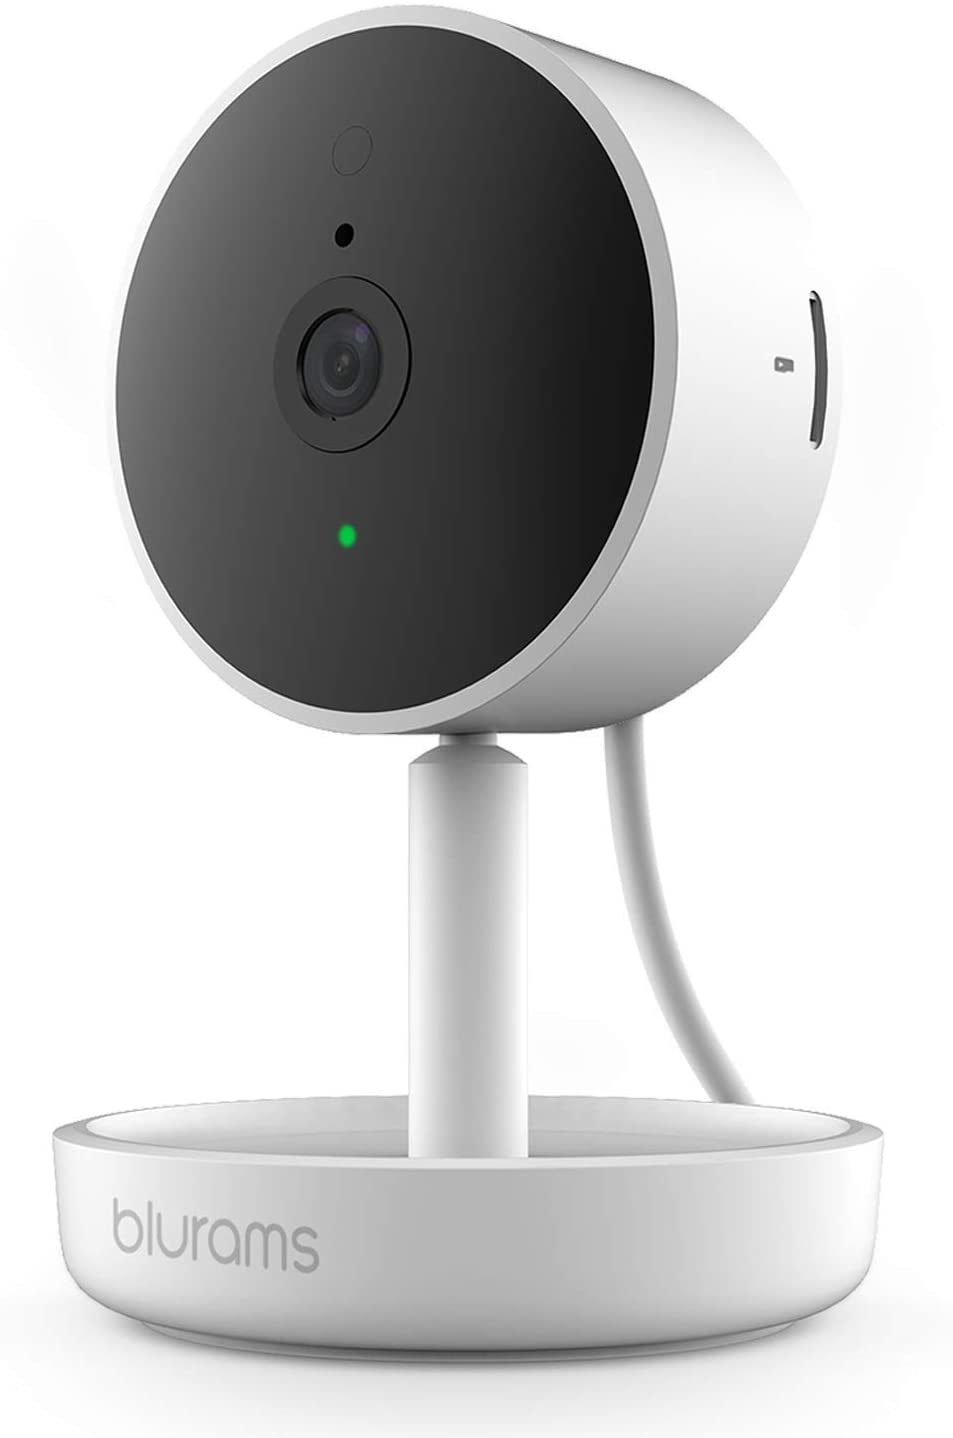 Blurums Indoor Security Cameras w/ Facial Recognition, 2-Way Talk, Smart Home Alerts, Privacy Area, Night Vision, Loud/Local Storage, Works with Alexa $19.99 + FS